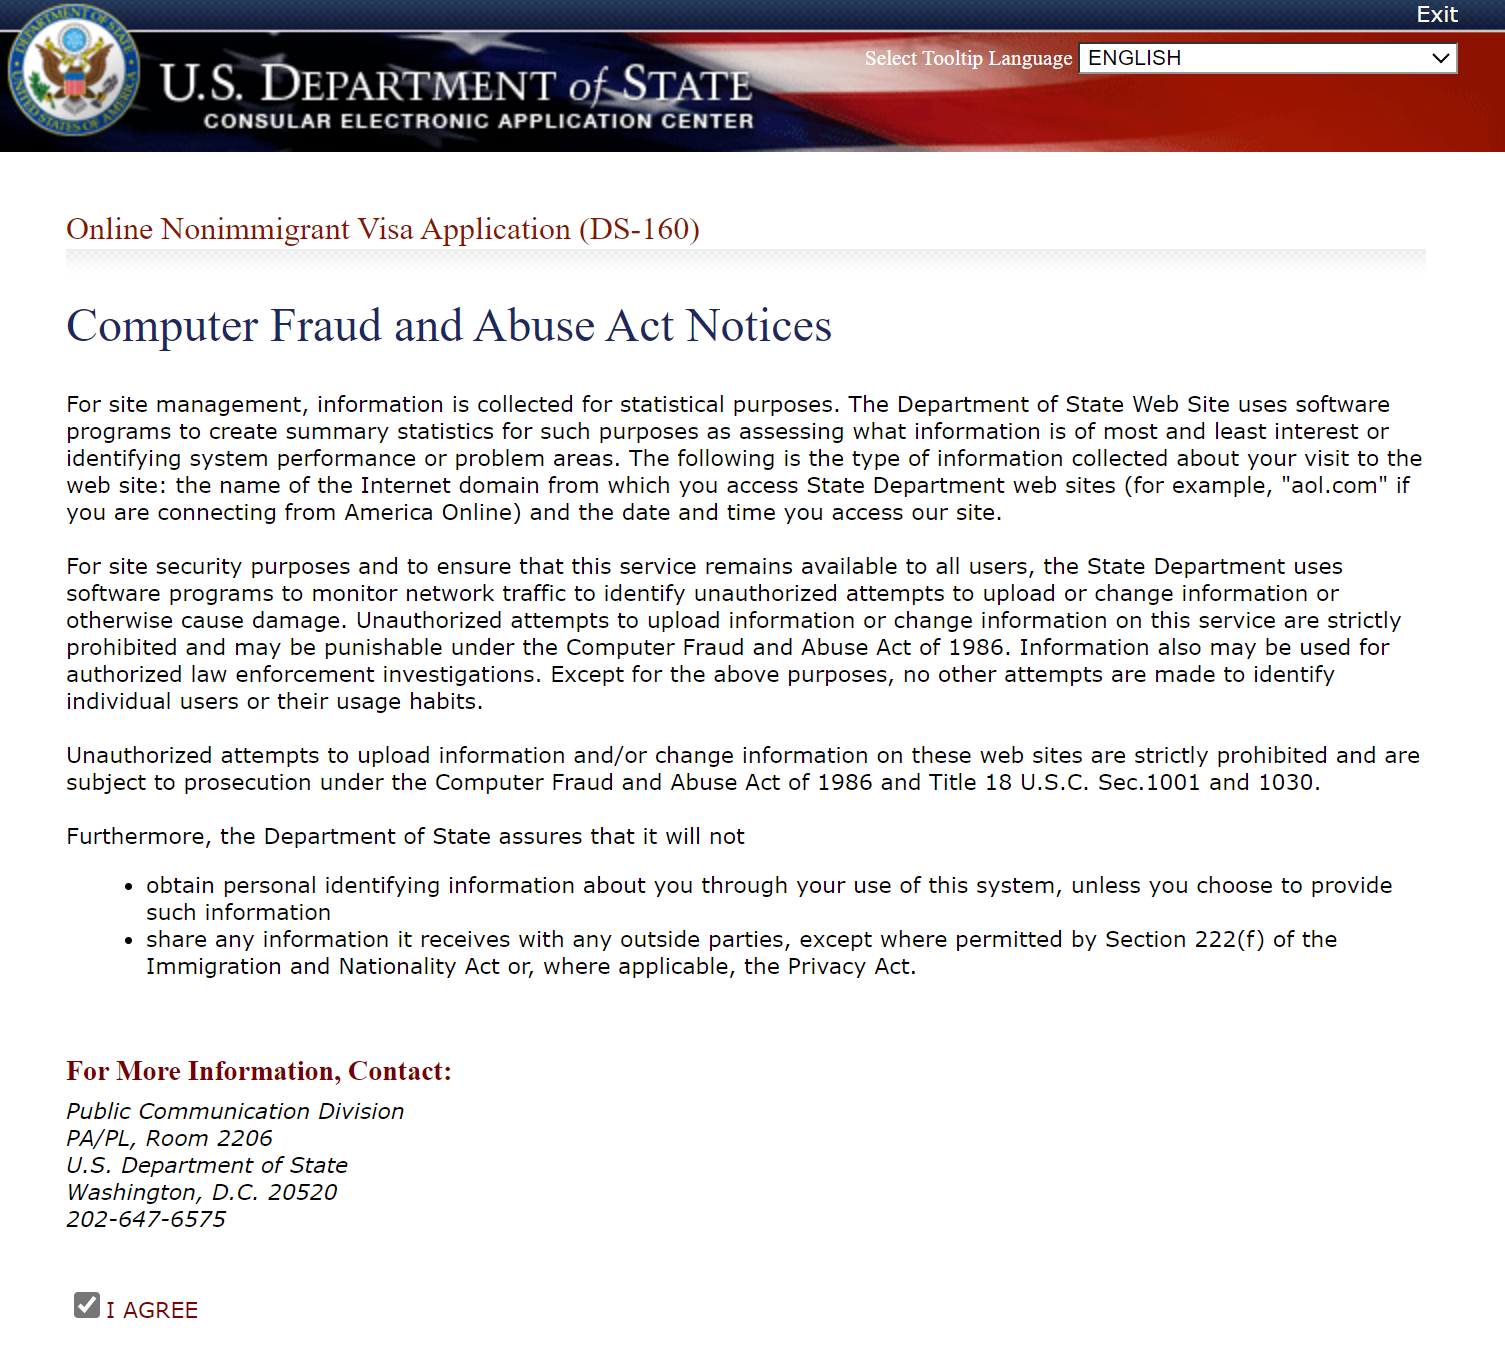 Computer Fraud and Abuse Act Notices